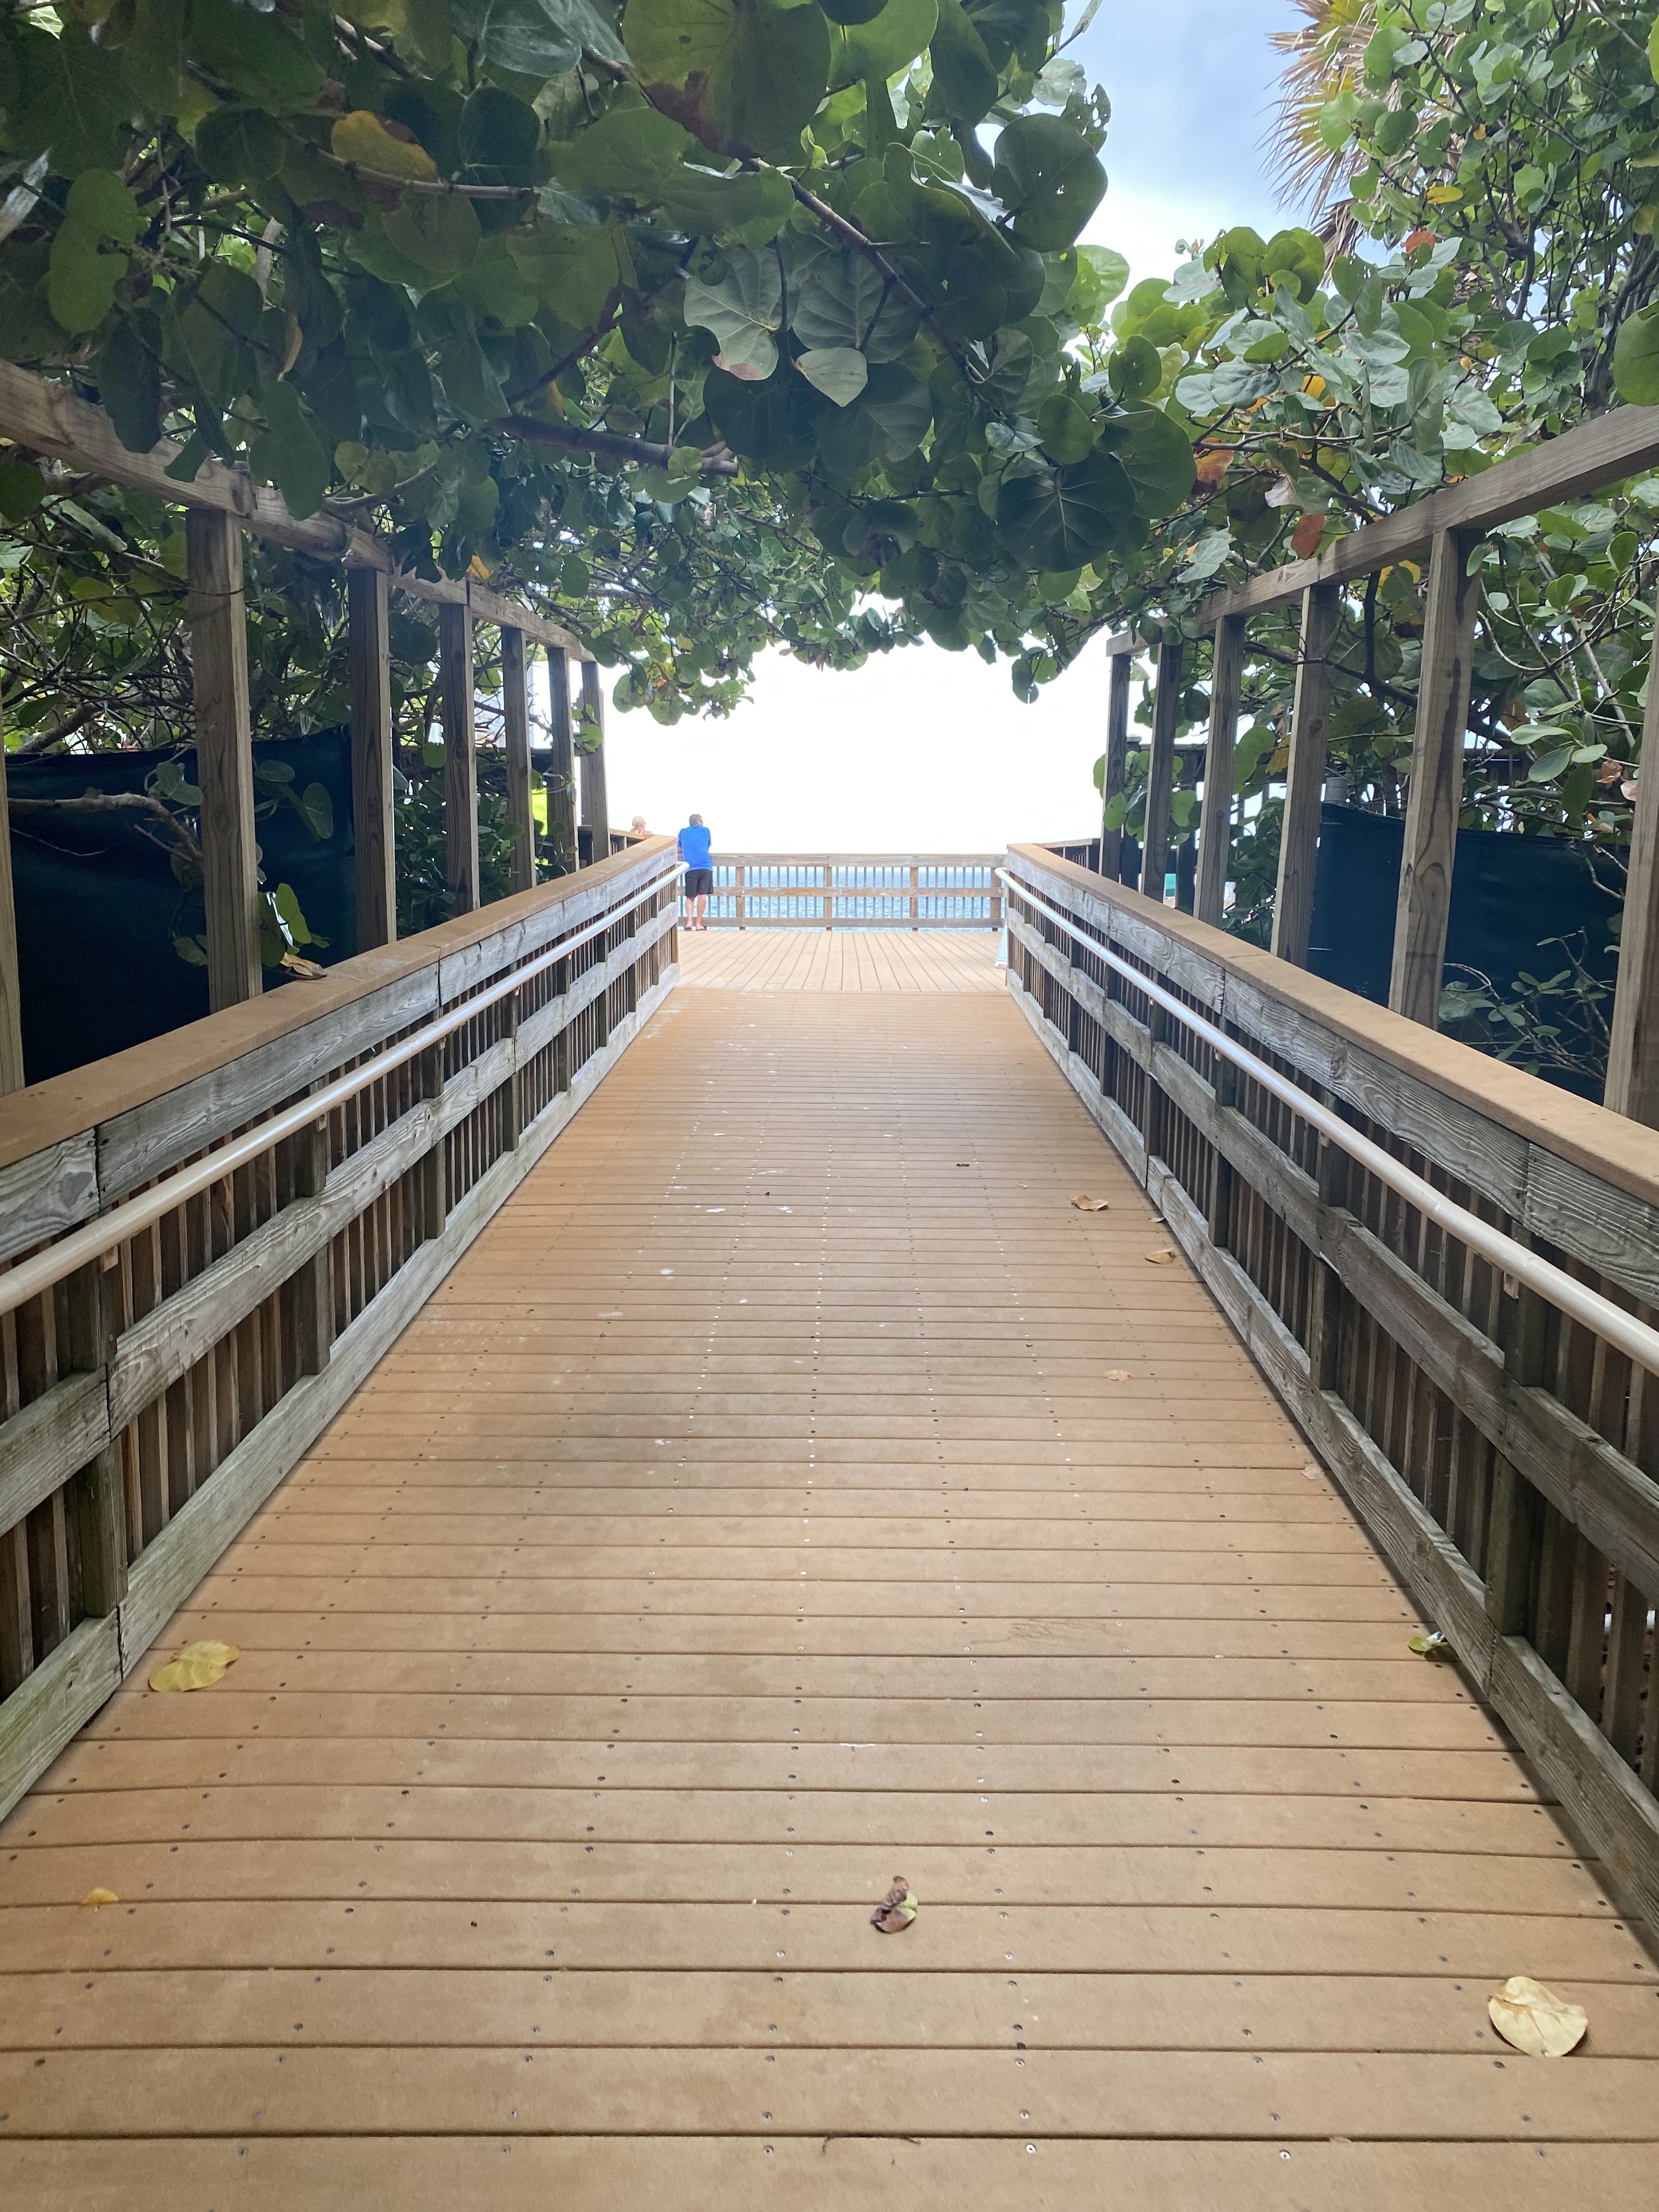  Pathway to the beach.  